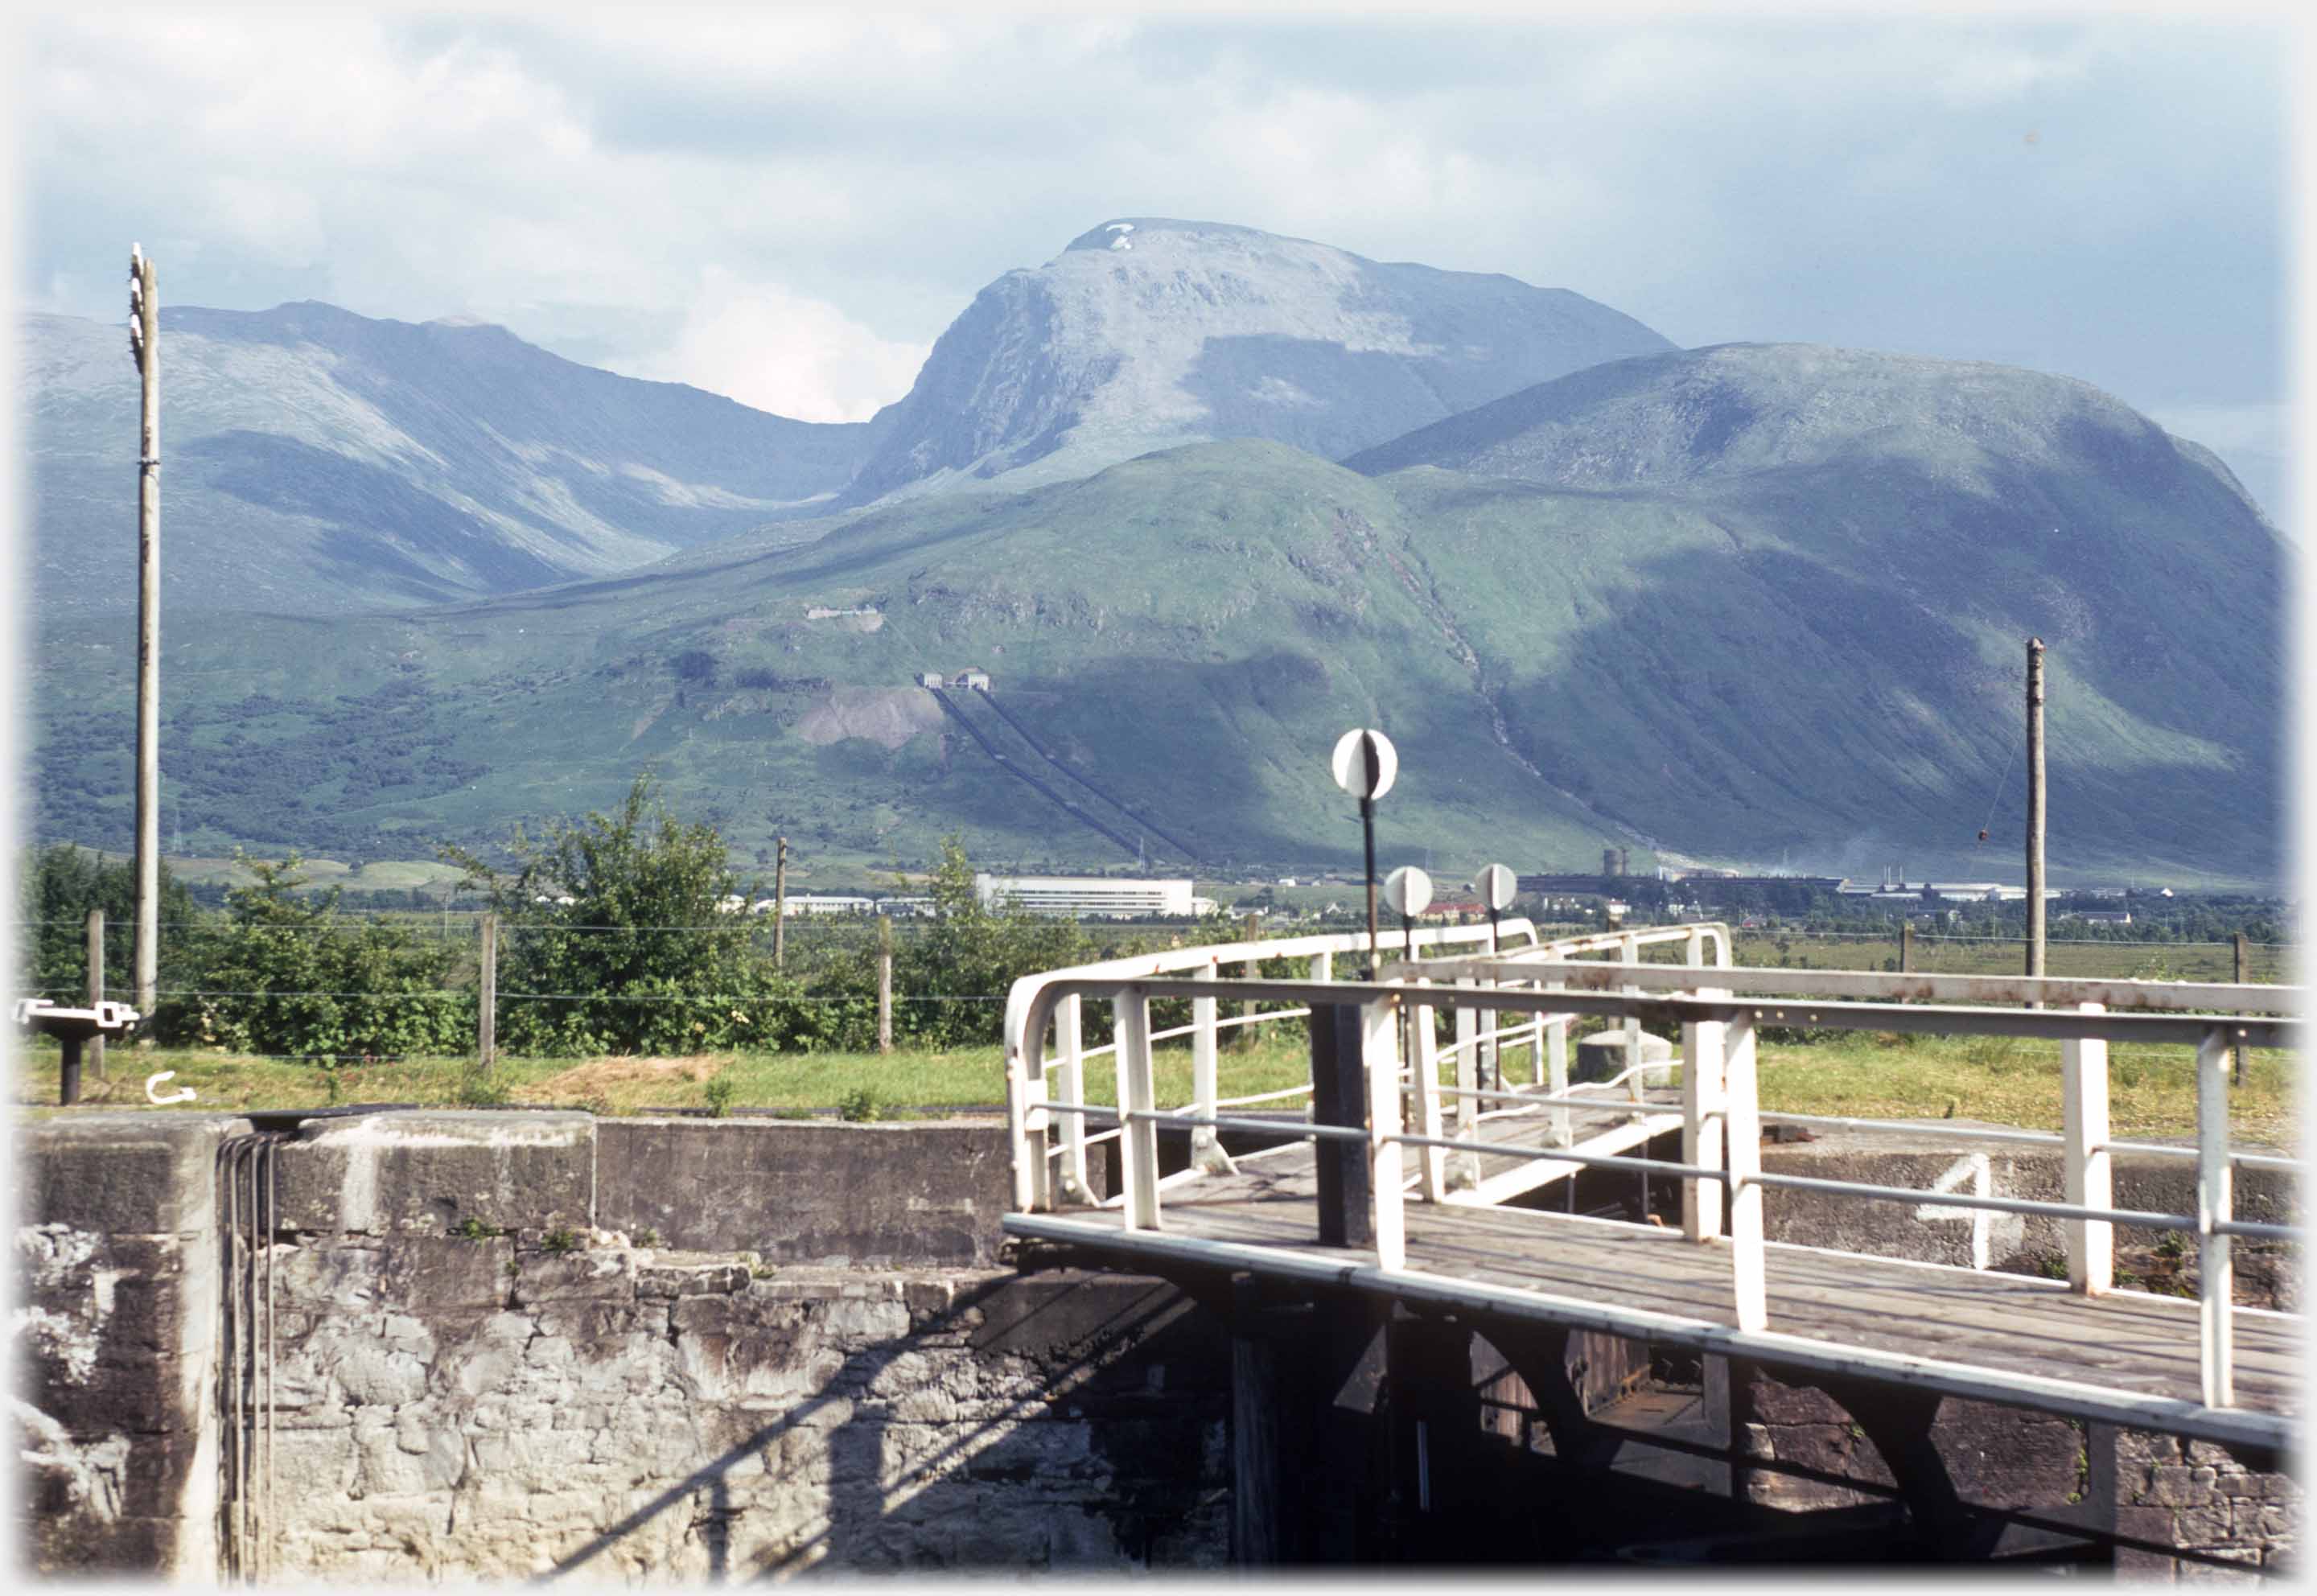 Full unclouded view of bulky mountain with lock gates in foreground.